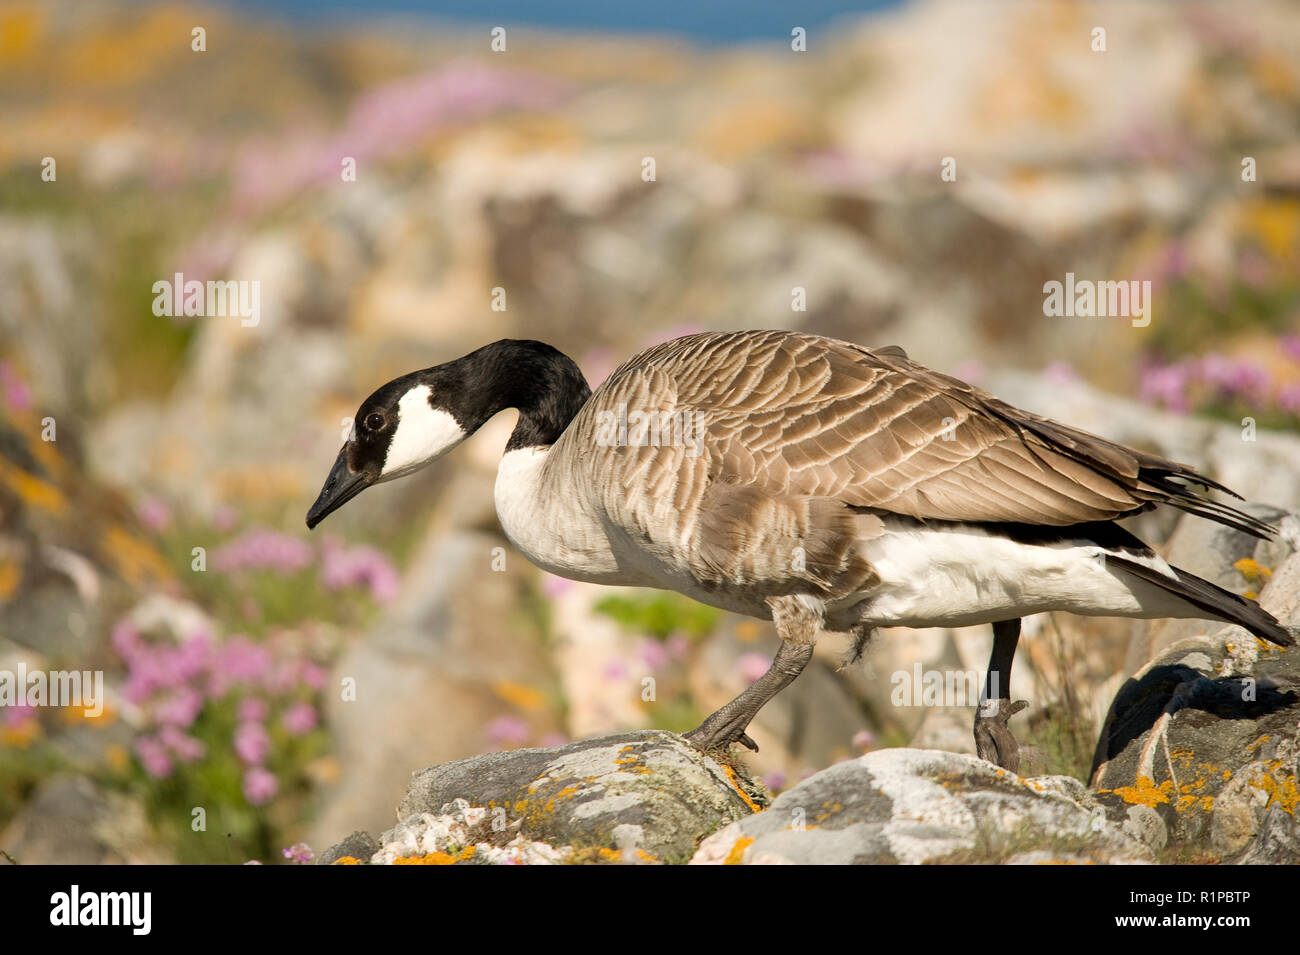 The Canada goose (Branta canadensis) is a large wild goose species with a  black head and neck, white cheeks, white under its chin, and a brown body. N  Stock Photo - Alamy